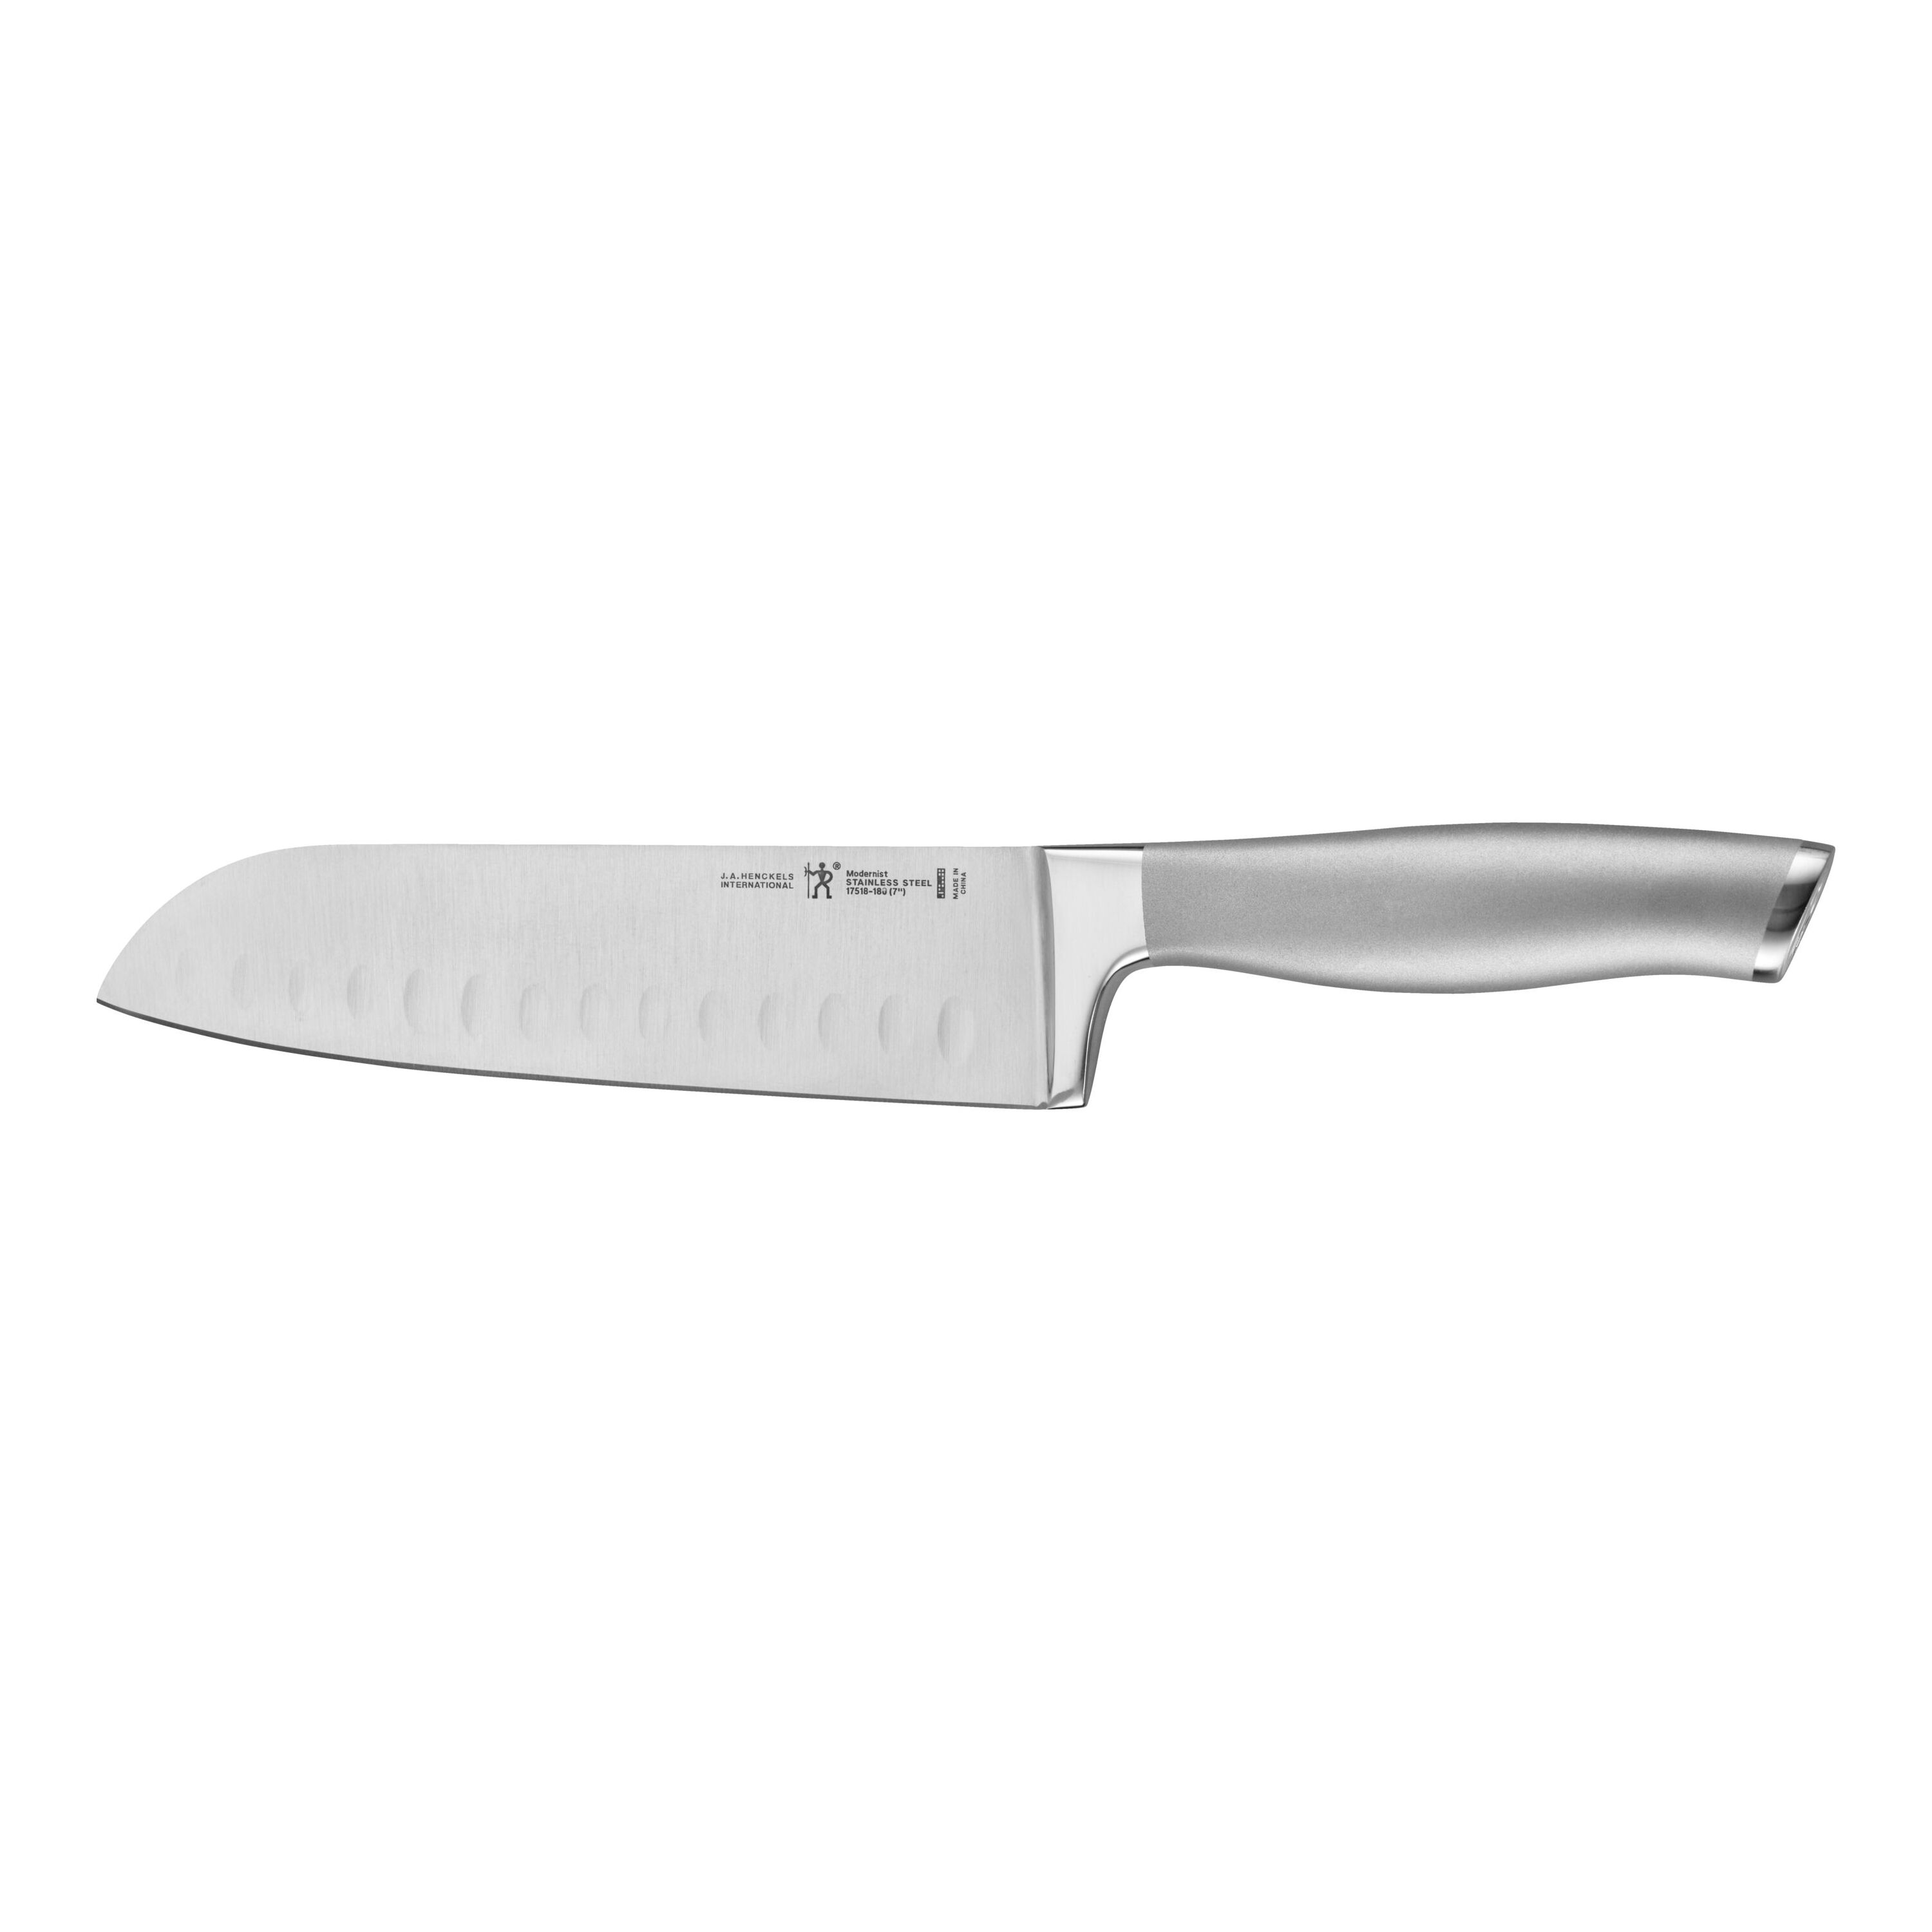 Henckels Self-Sharpening Knife Sets That Cut Through Food 'Like Butter' Are  Up to 70% Off at Target